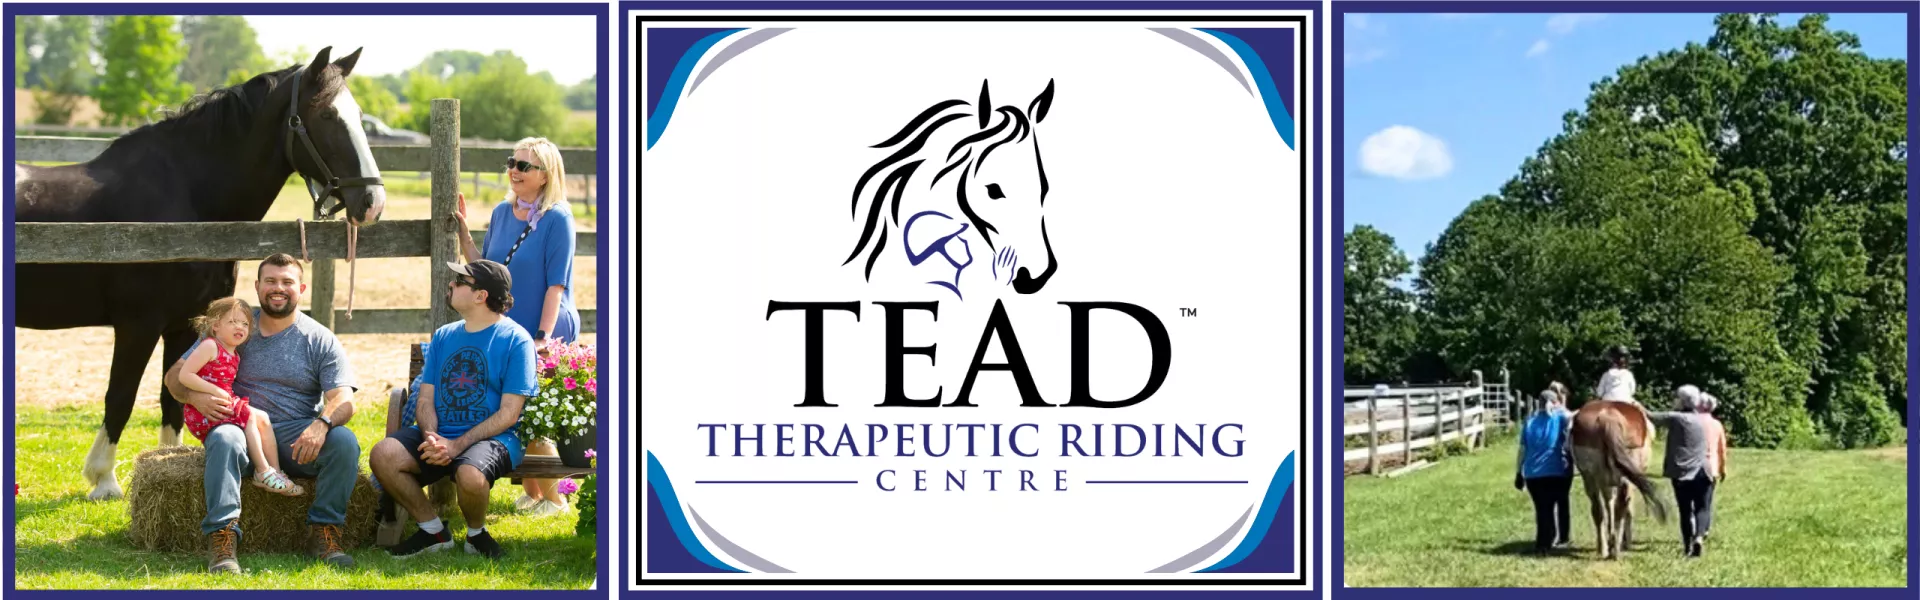 Welcome to TEAD Therapeutic Riding Centre Image of horses and families